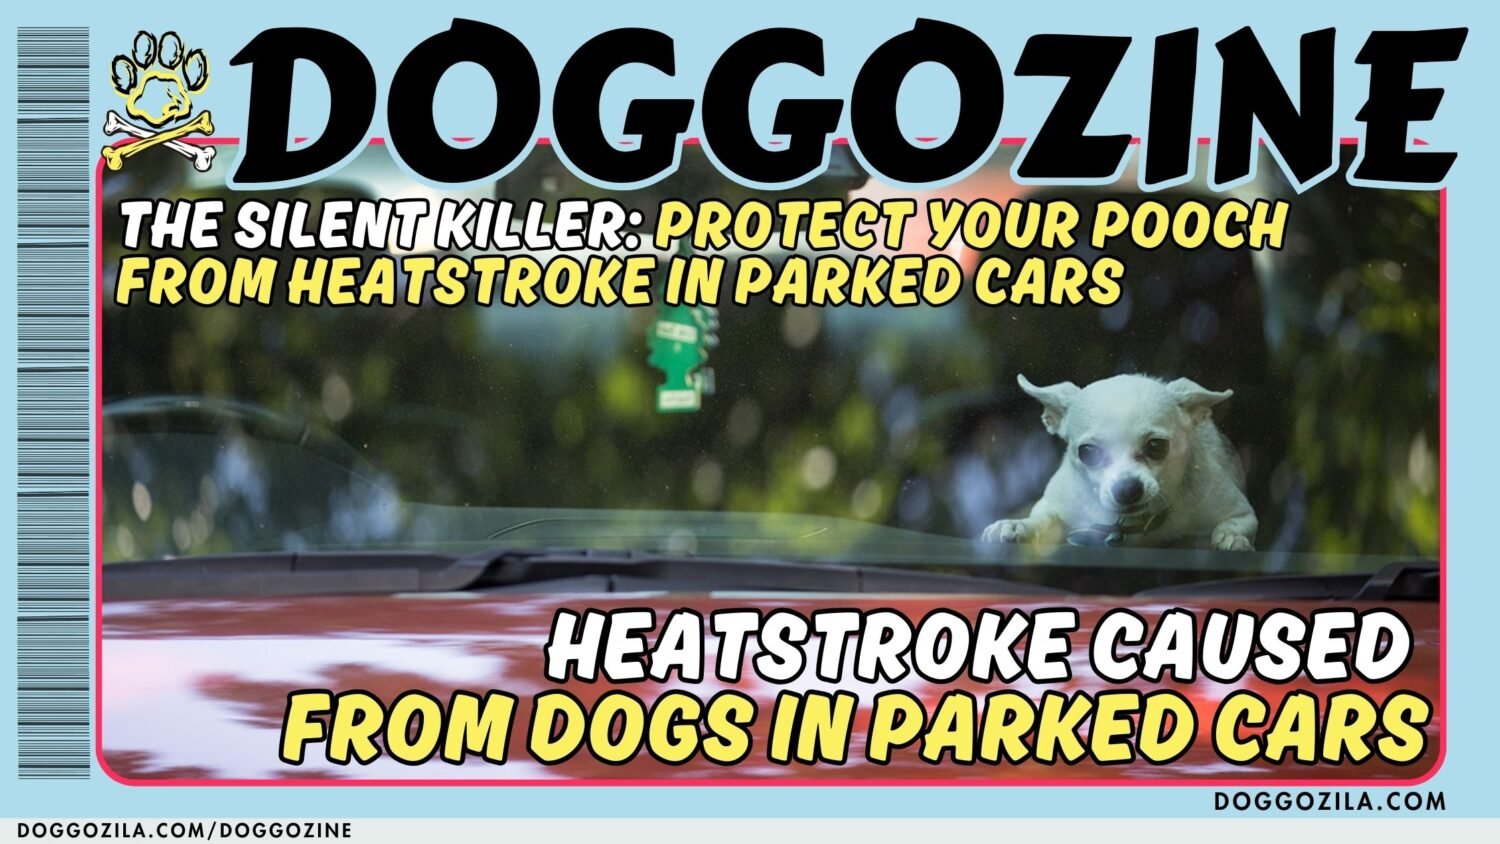 HEATSTROKE caused from DOGS IN PARKED CARS